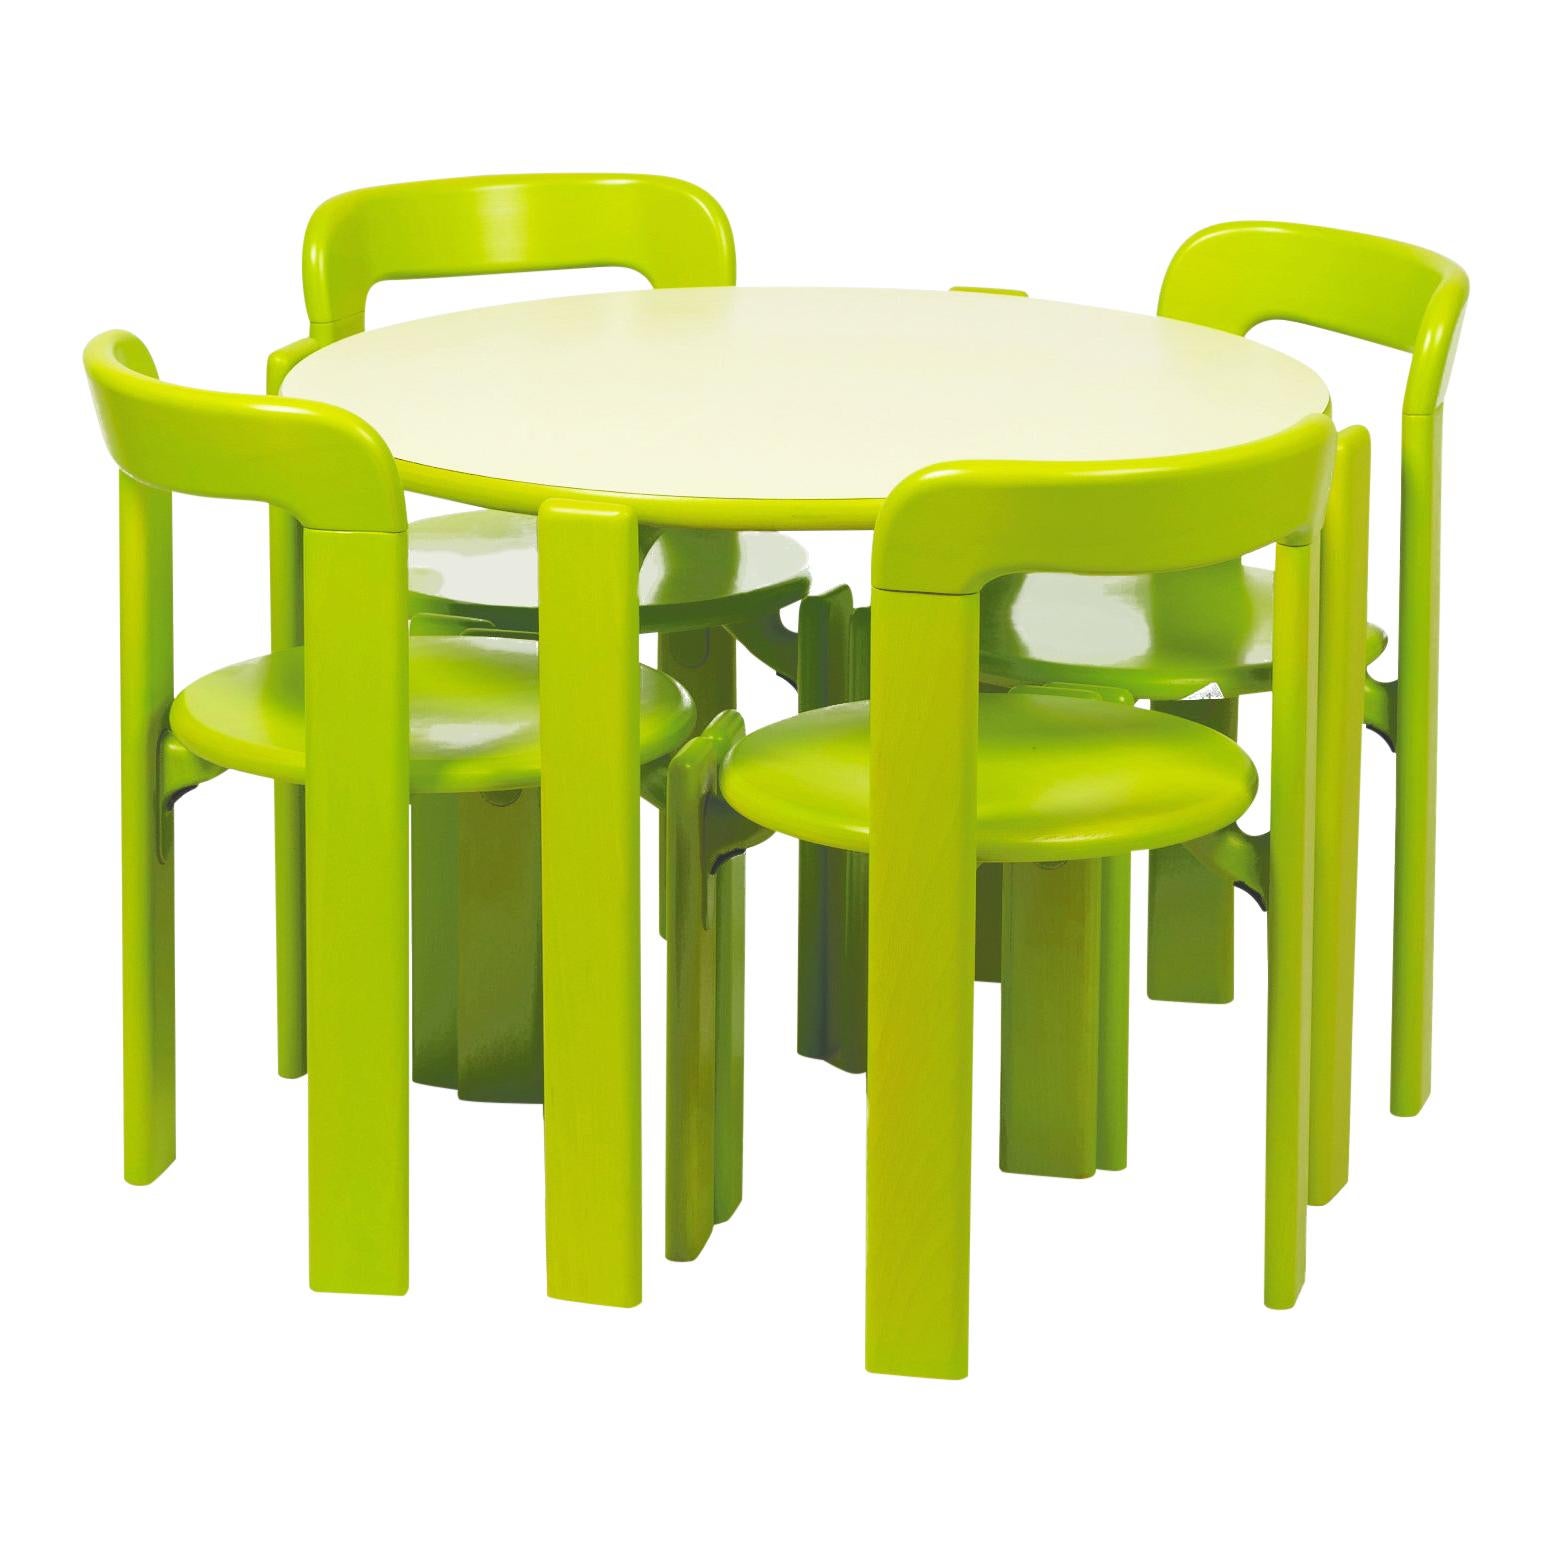 Dietiker Rey Junior Set, Kids Table and Chairs in Green, Designed by Bruno Rey